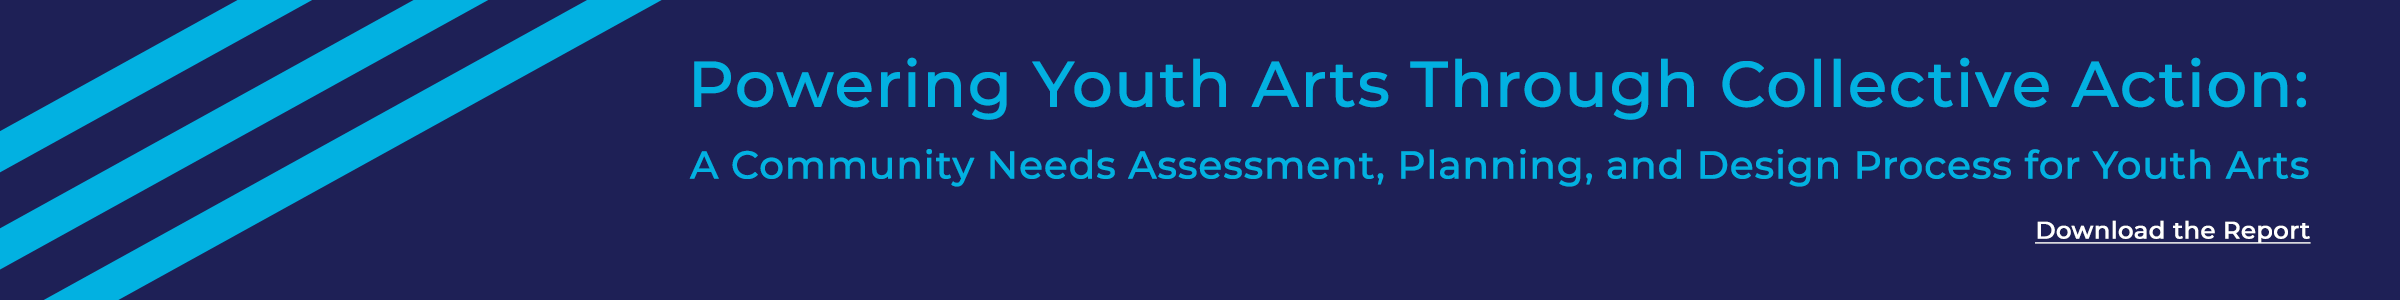 Powering Youth Arts Through Collective Action